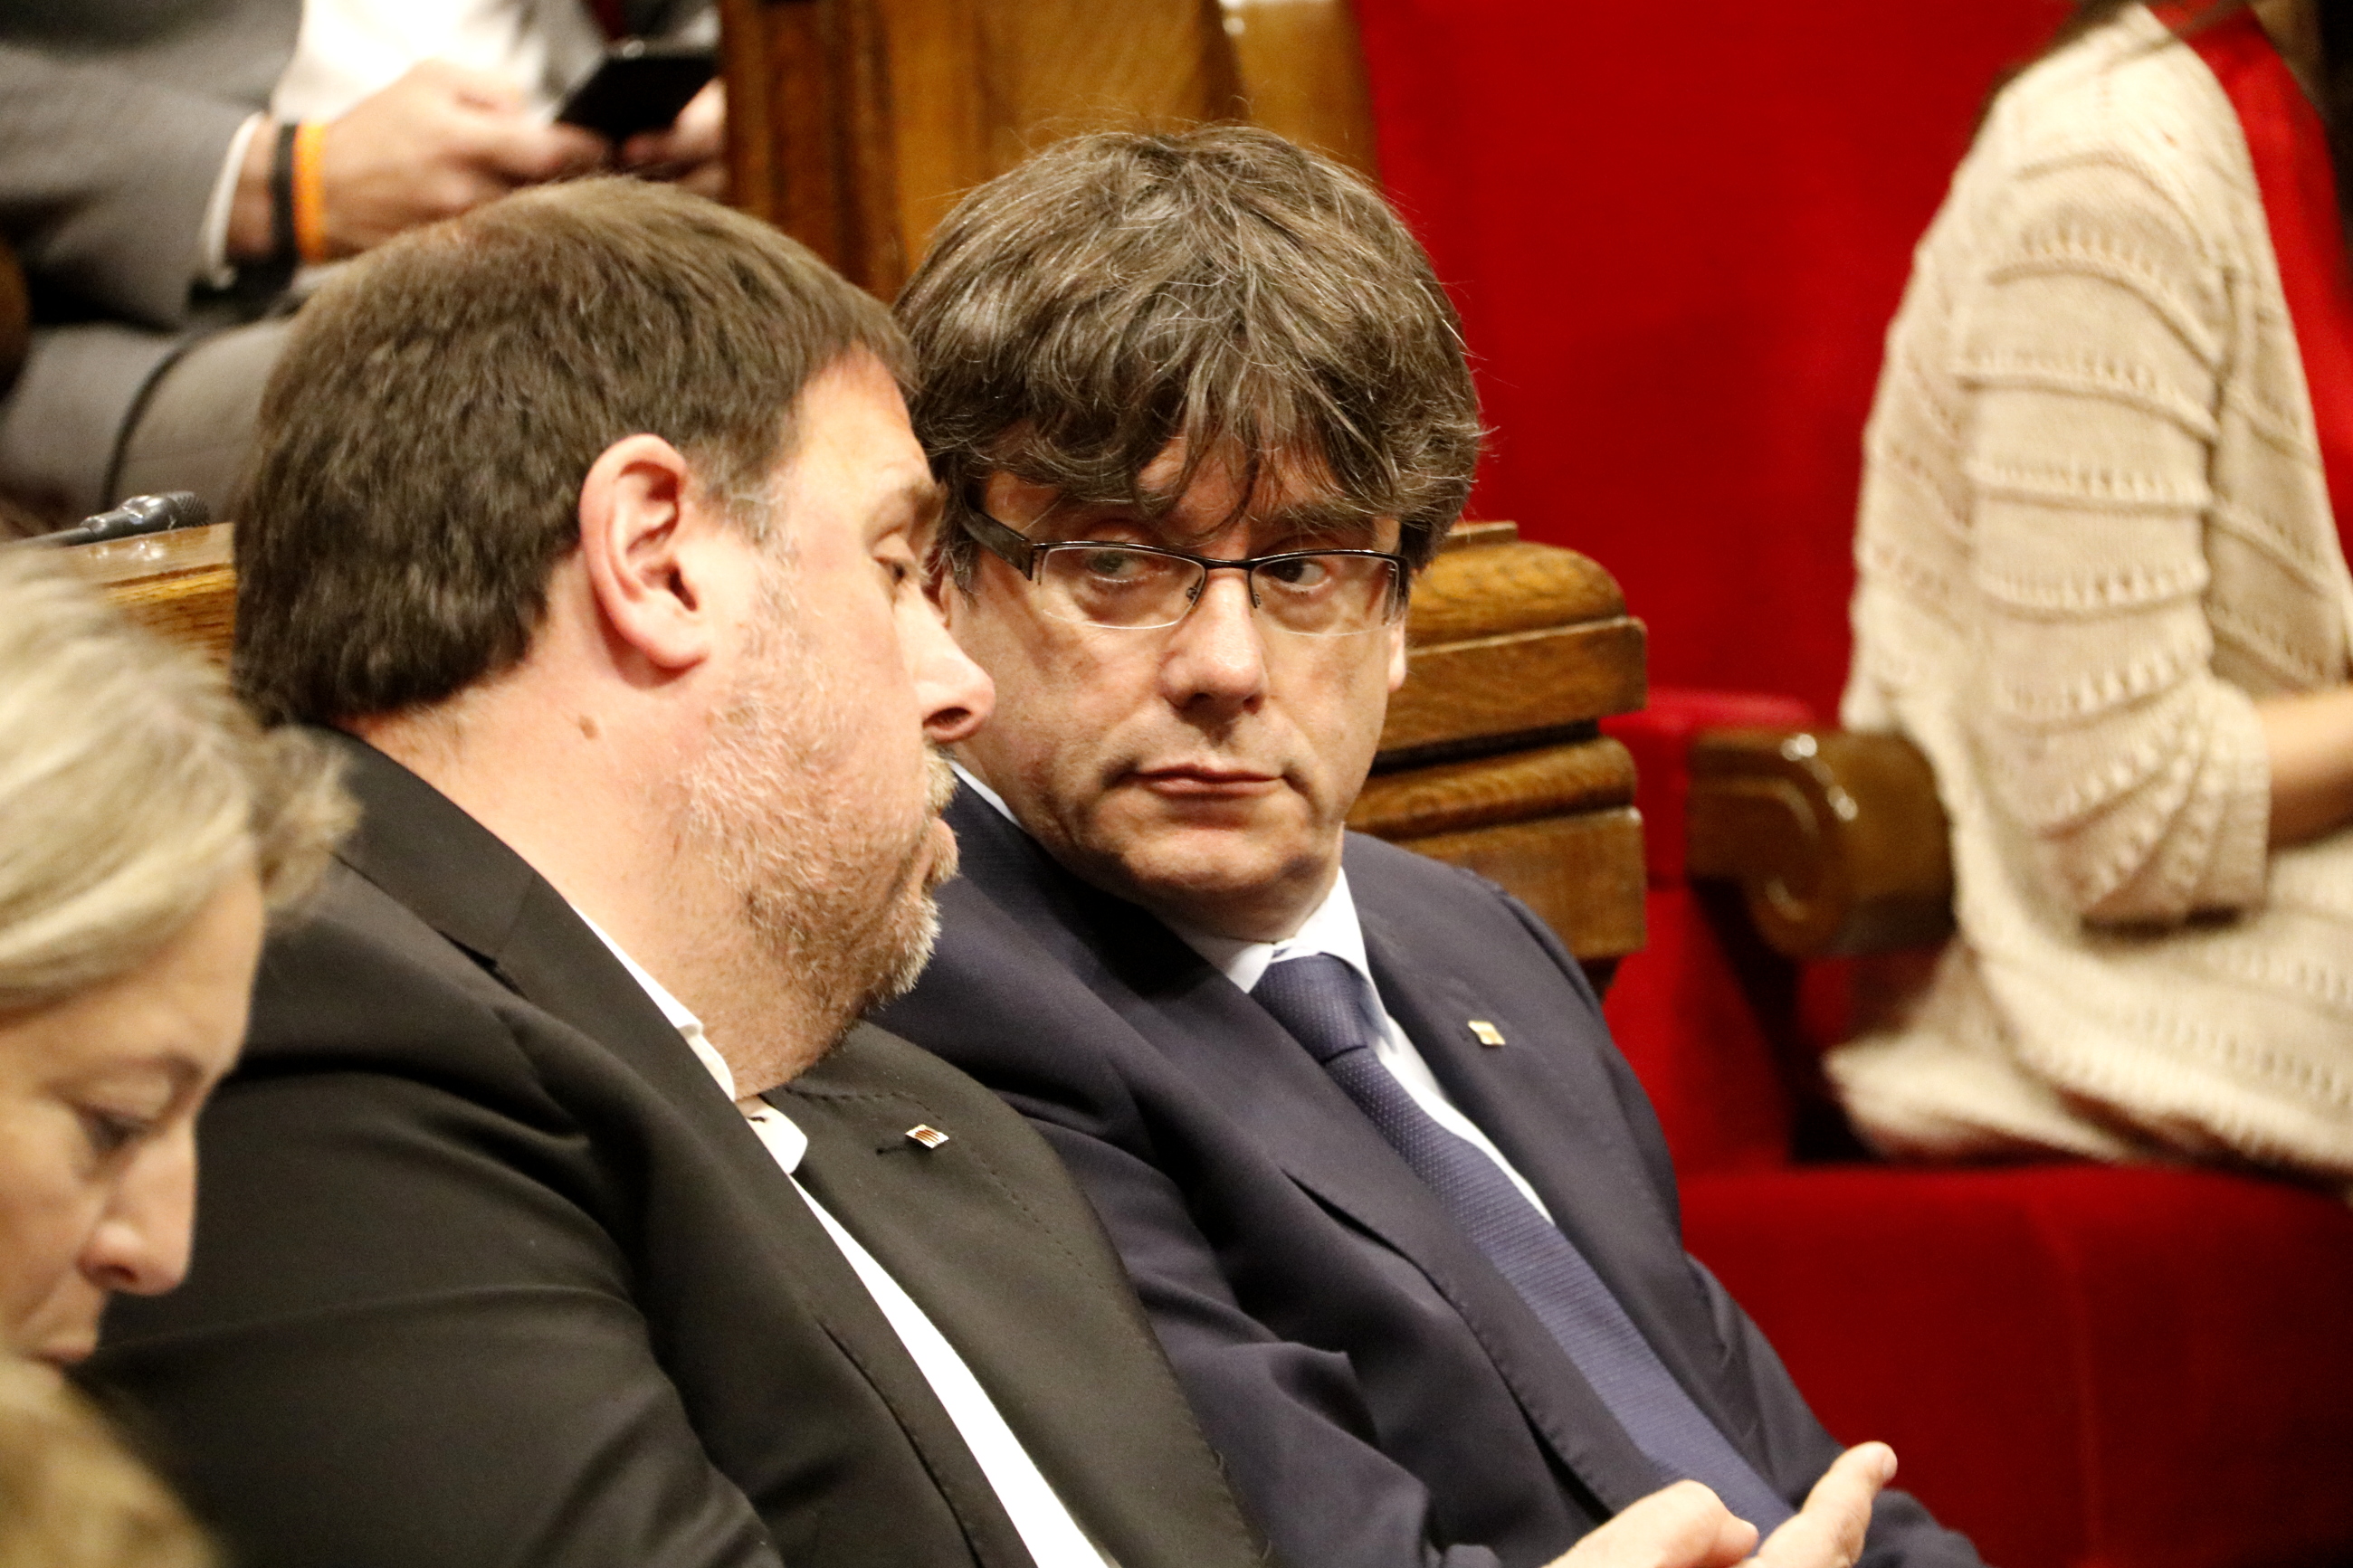 Catalan President, Carles Puigdemont, and VP, Oriol Junqueras at the session (by Rafa Garrido)